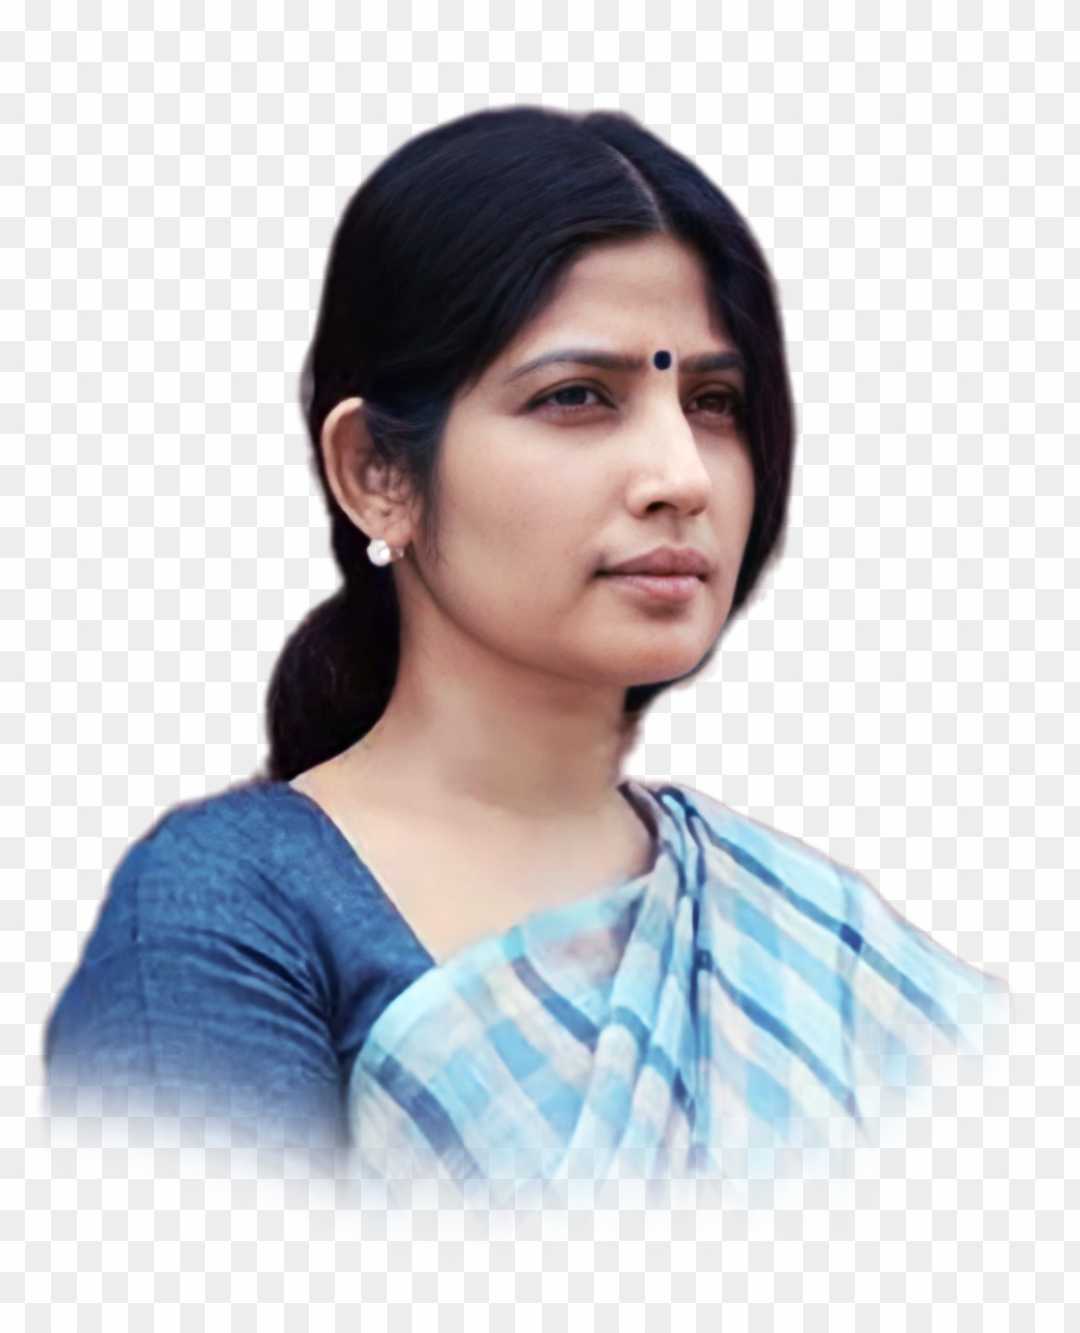 Dimple yadav png images